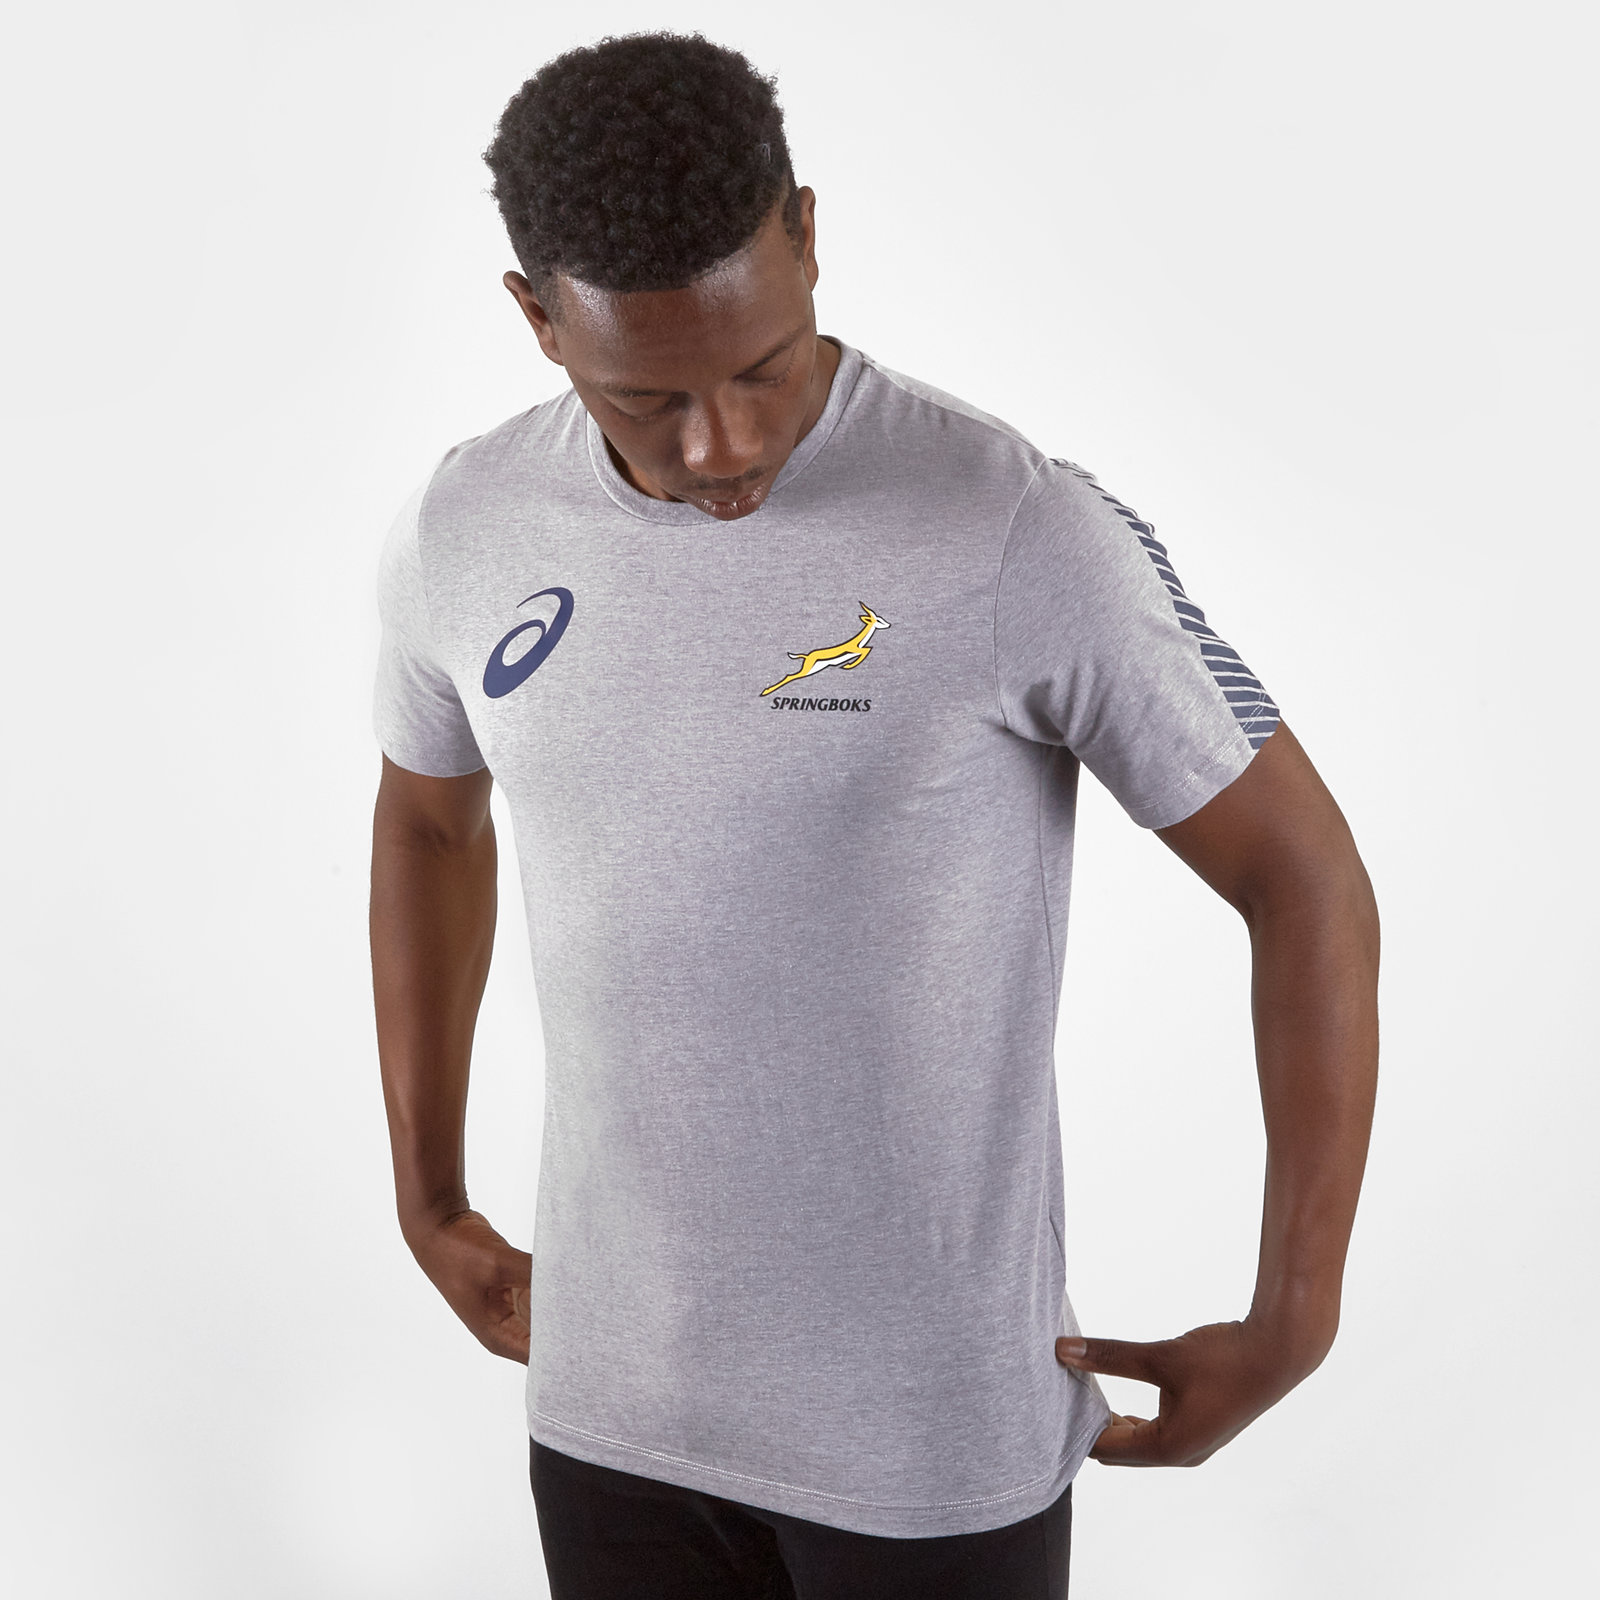 south africa rugby training top